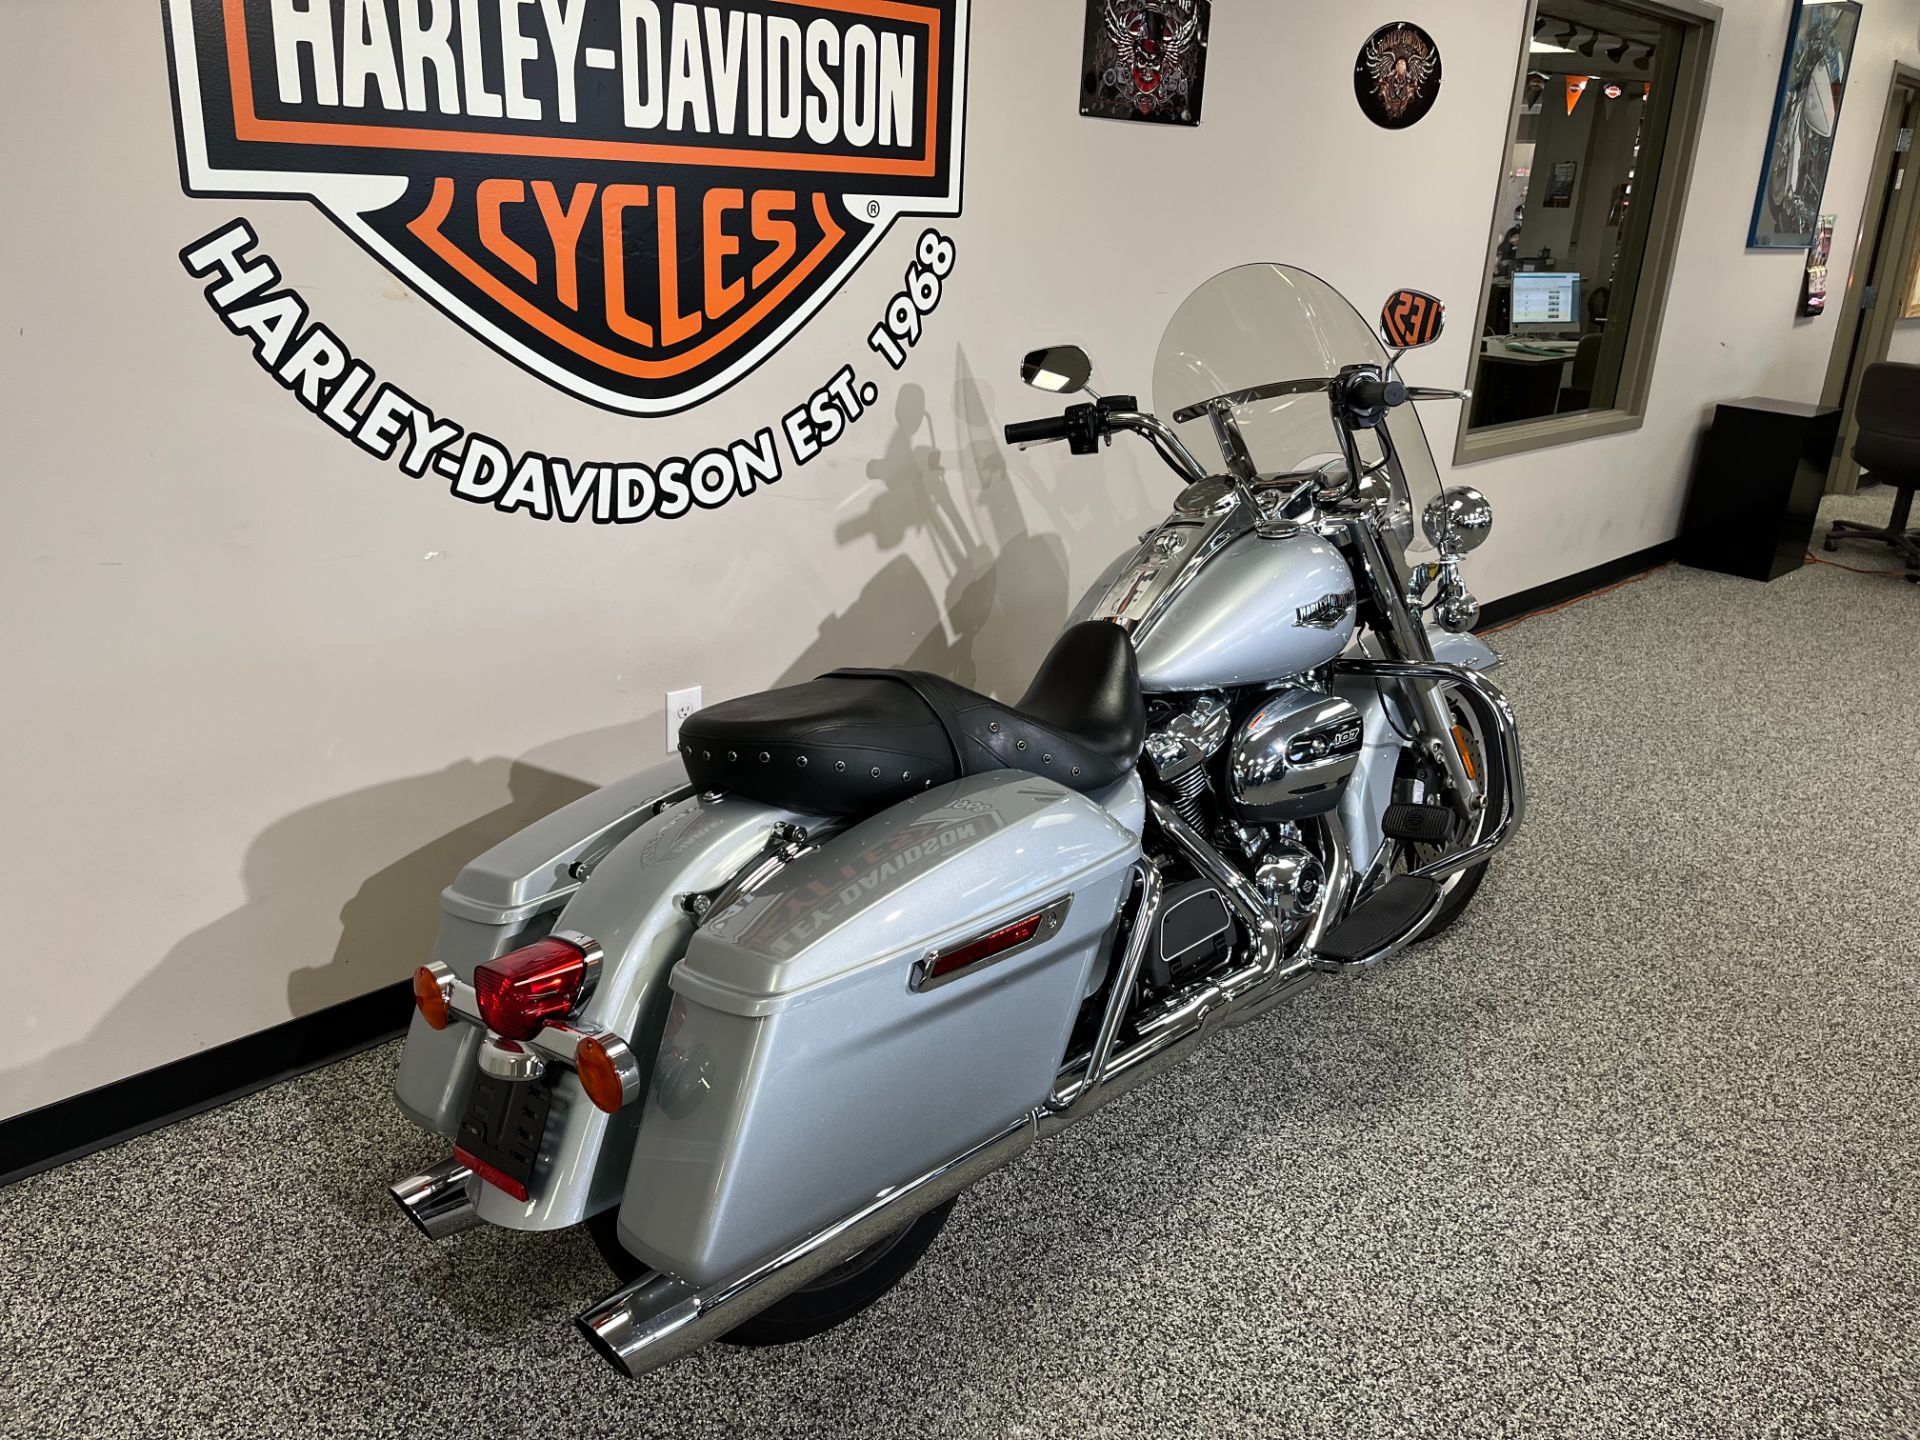 2019 Harley-Davidson Road King® in Knoxville, Tennessee - Photo 3